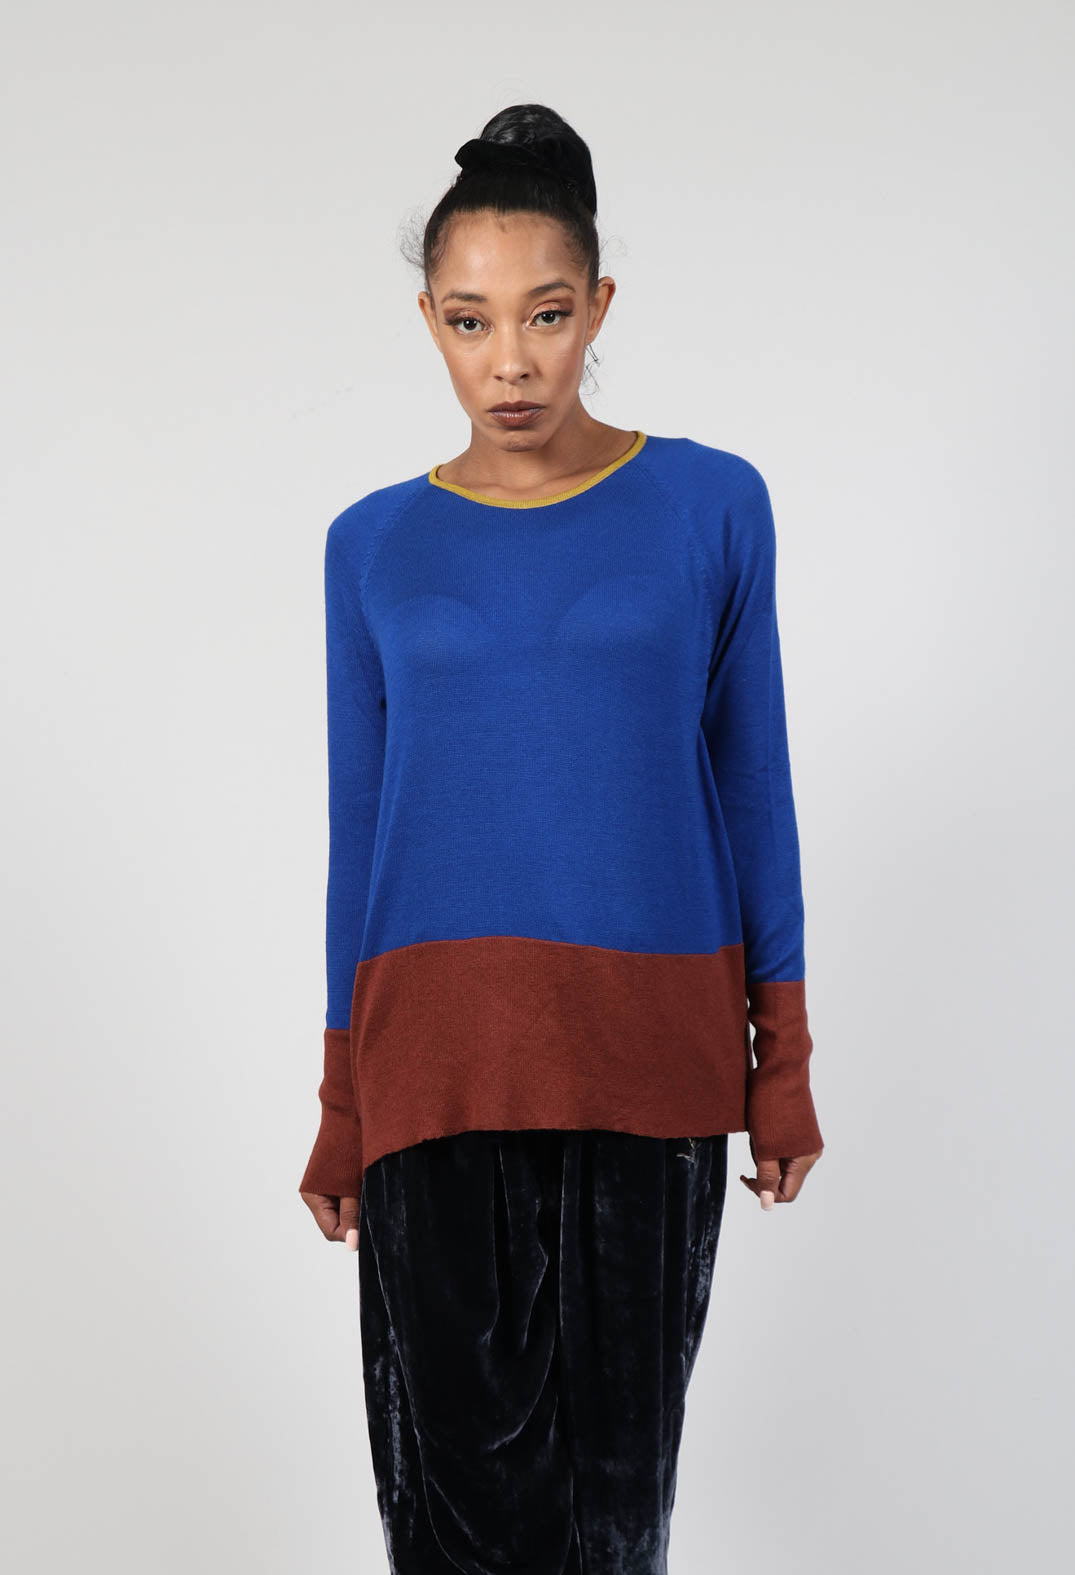 Top Key Round Neck in Sapphire and Cinnamon